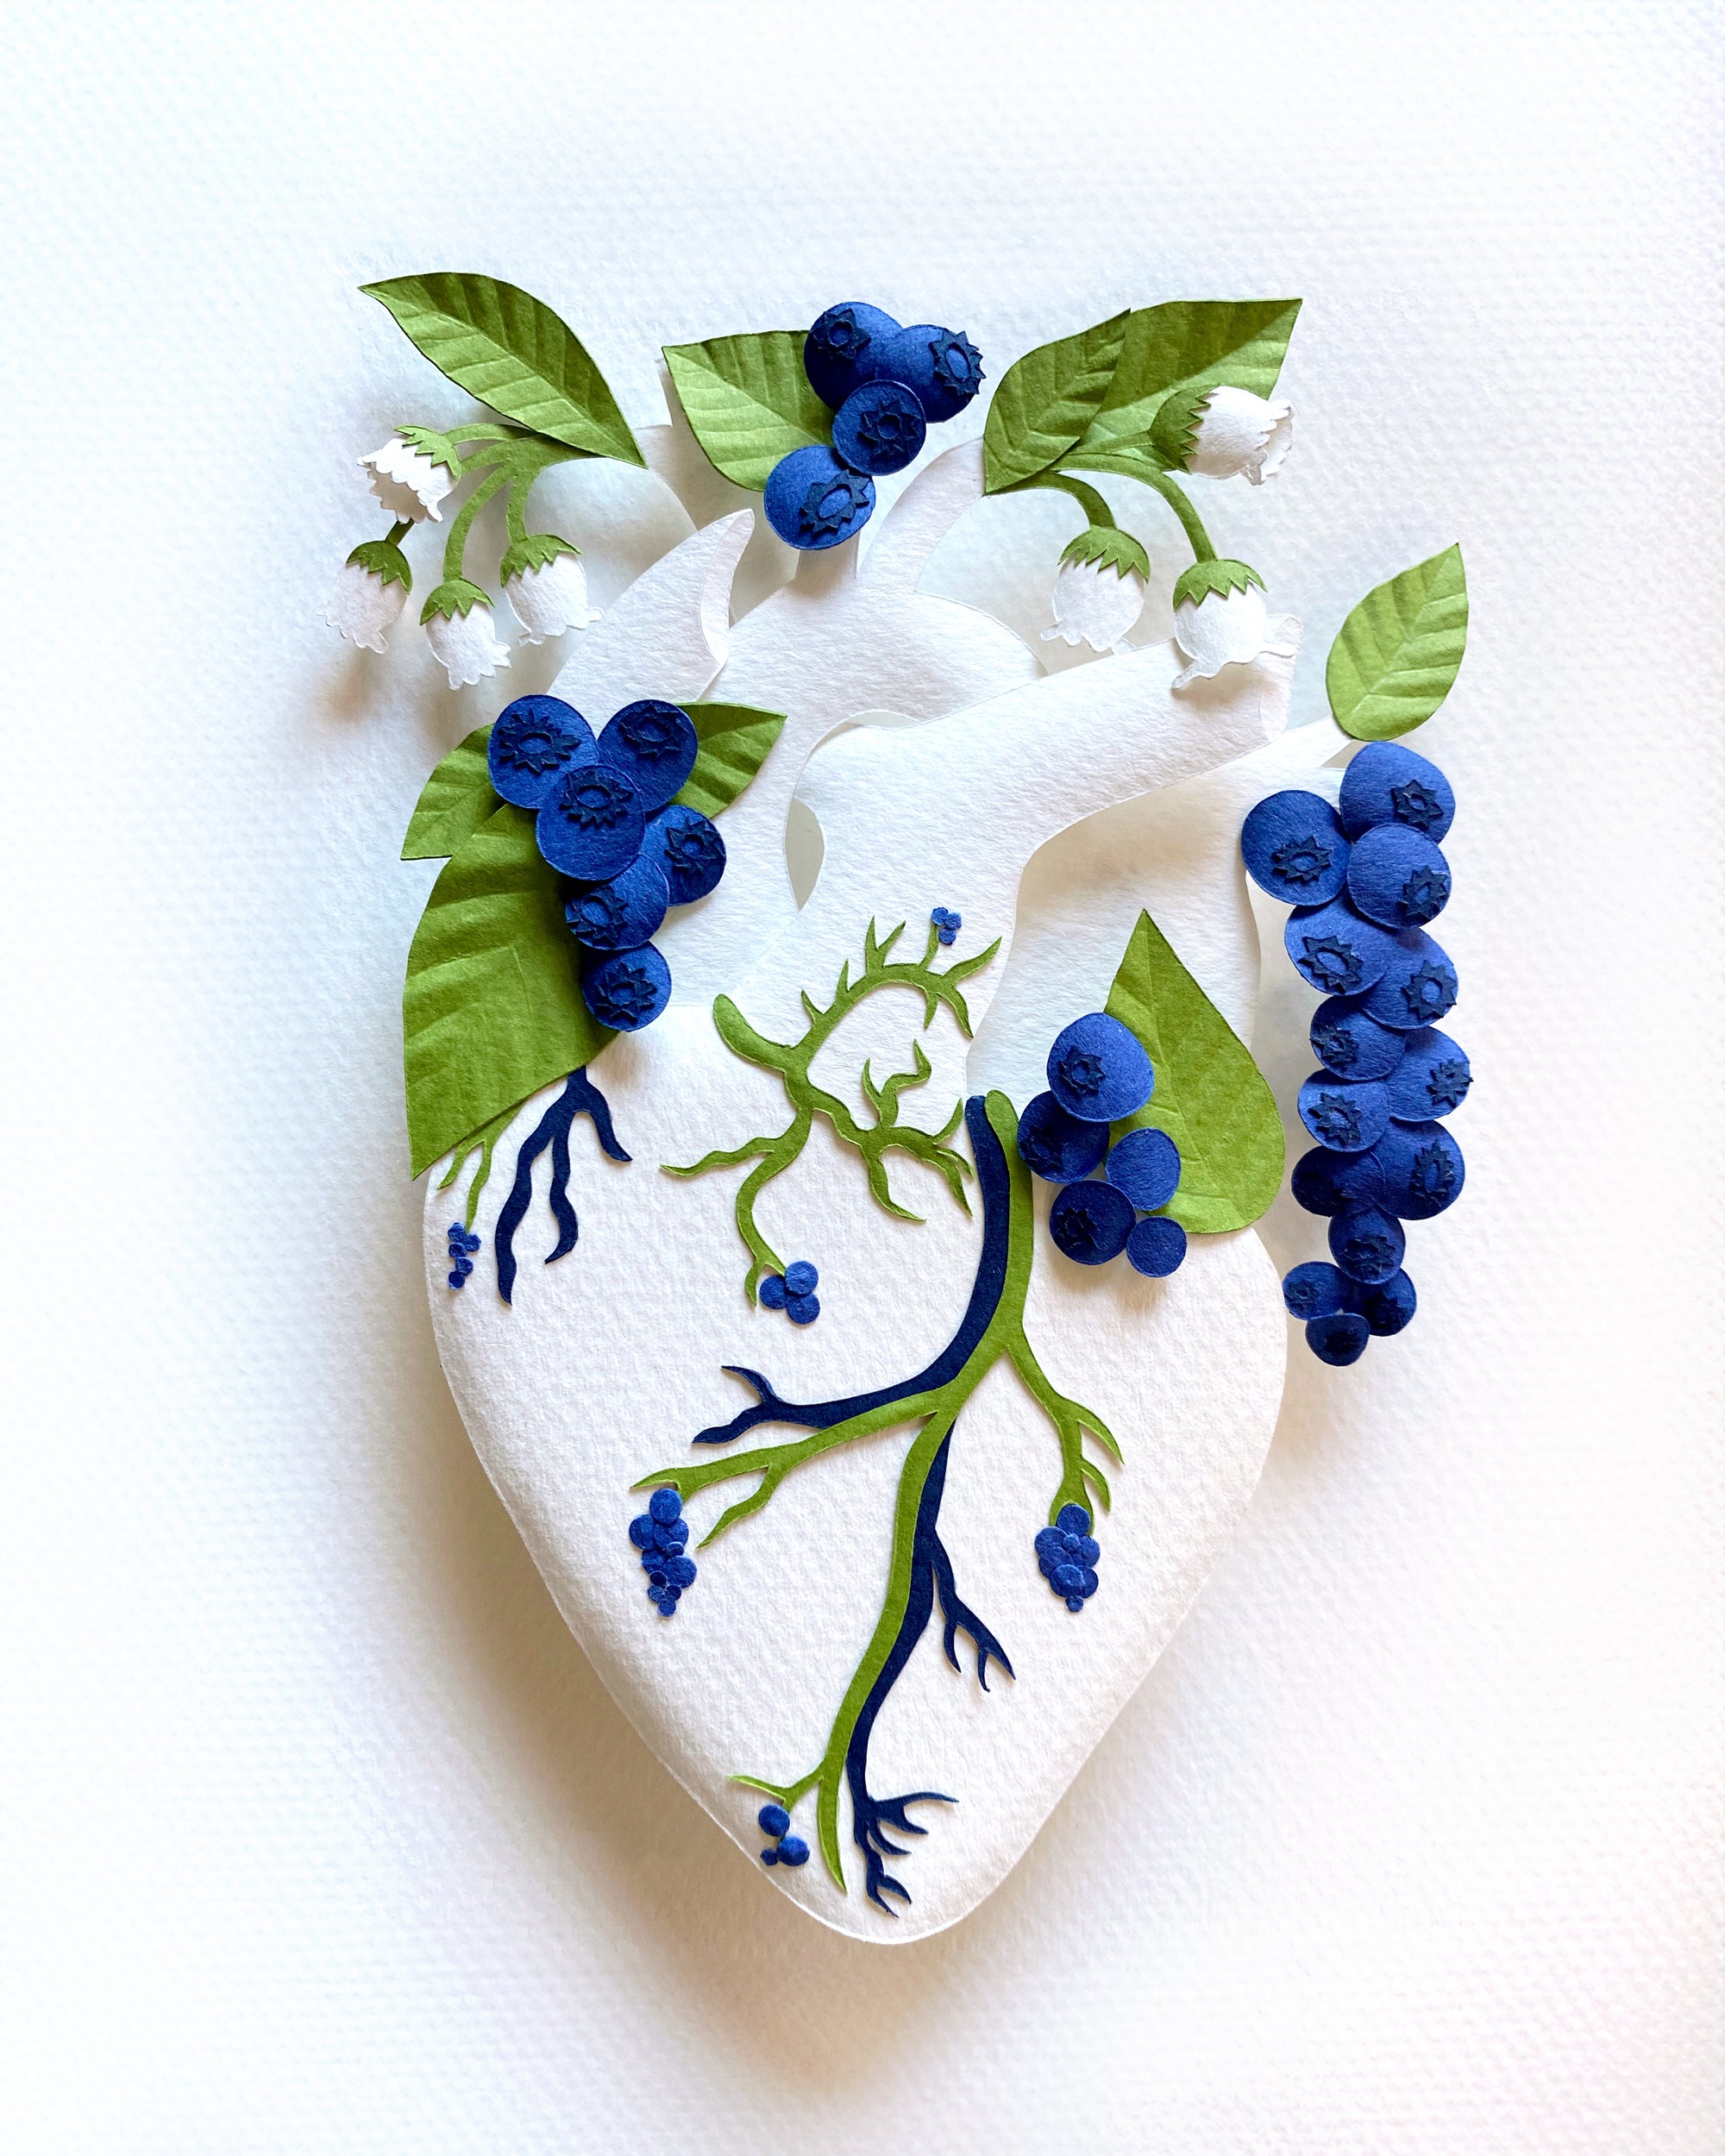 Anatomical heart with blueberries made of cut paper